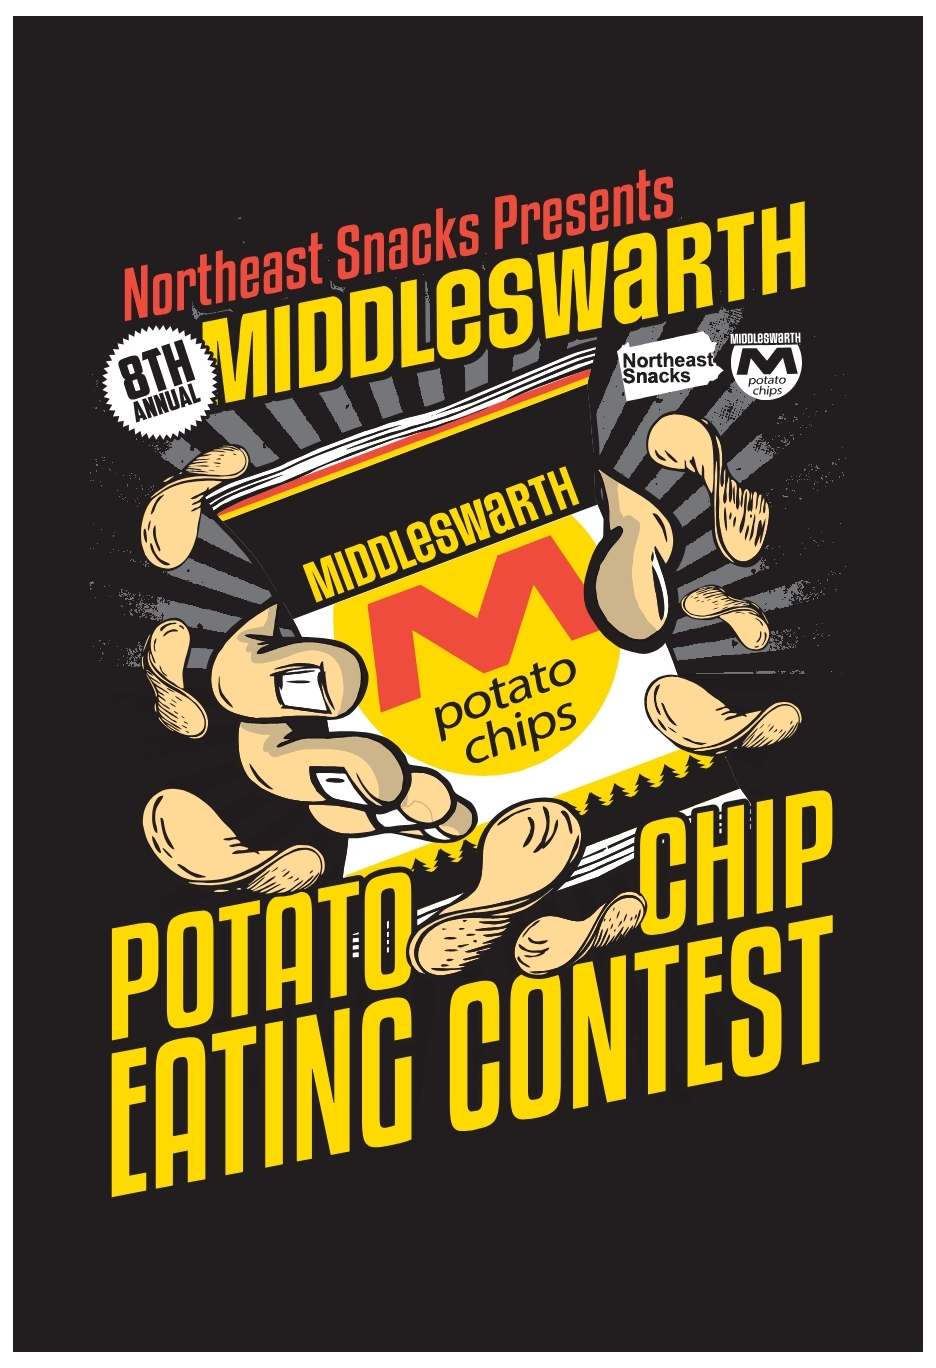 2023 Middleswarth Potato Chip Eating Contest Participant Entry